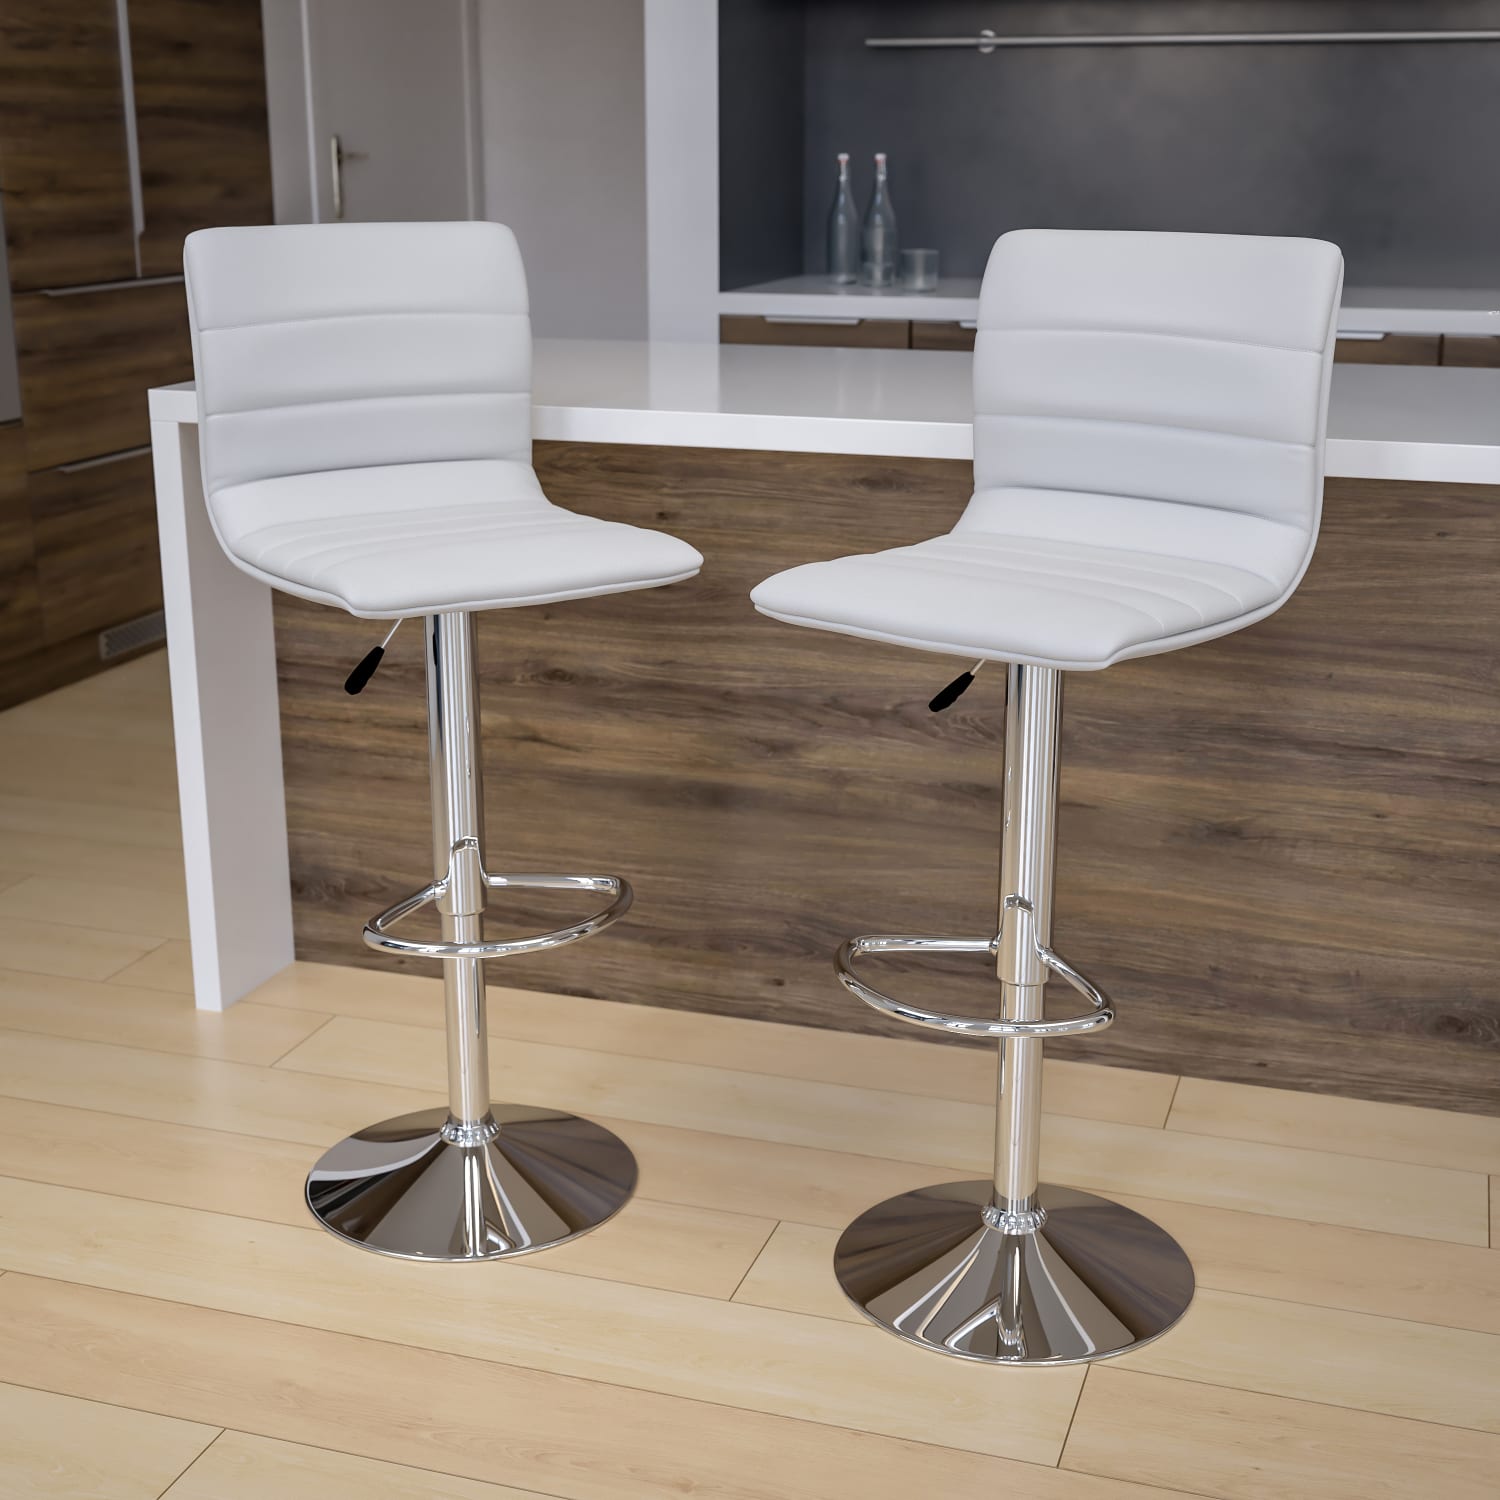 2 Pack Modern White Vinyl Adjustable Bar Stool with Back, Counter Height Swivel Stool with Chrome Pedestal Base